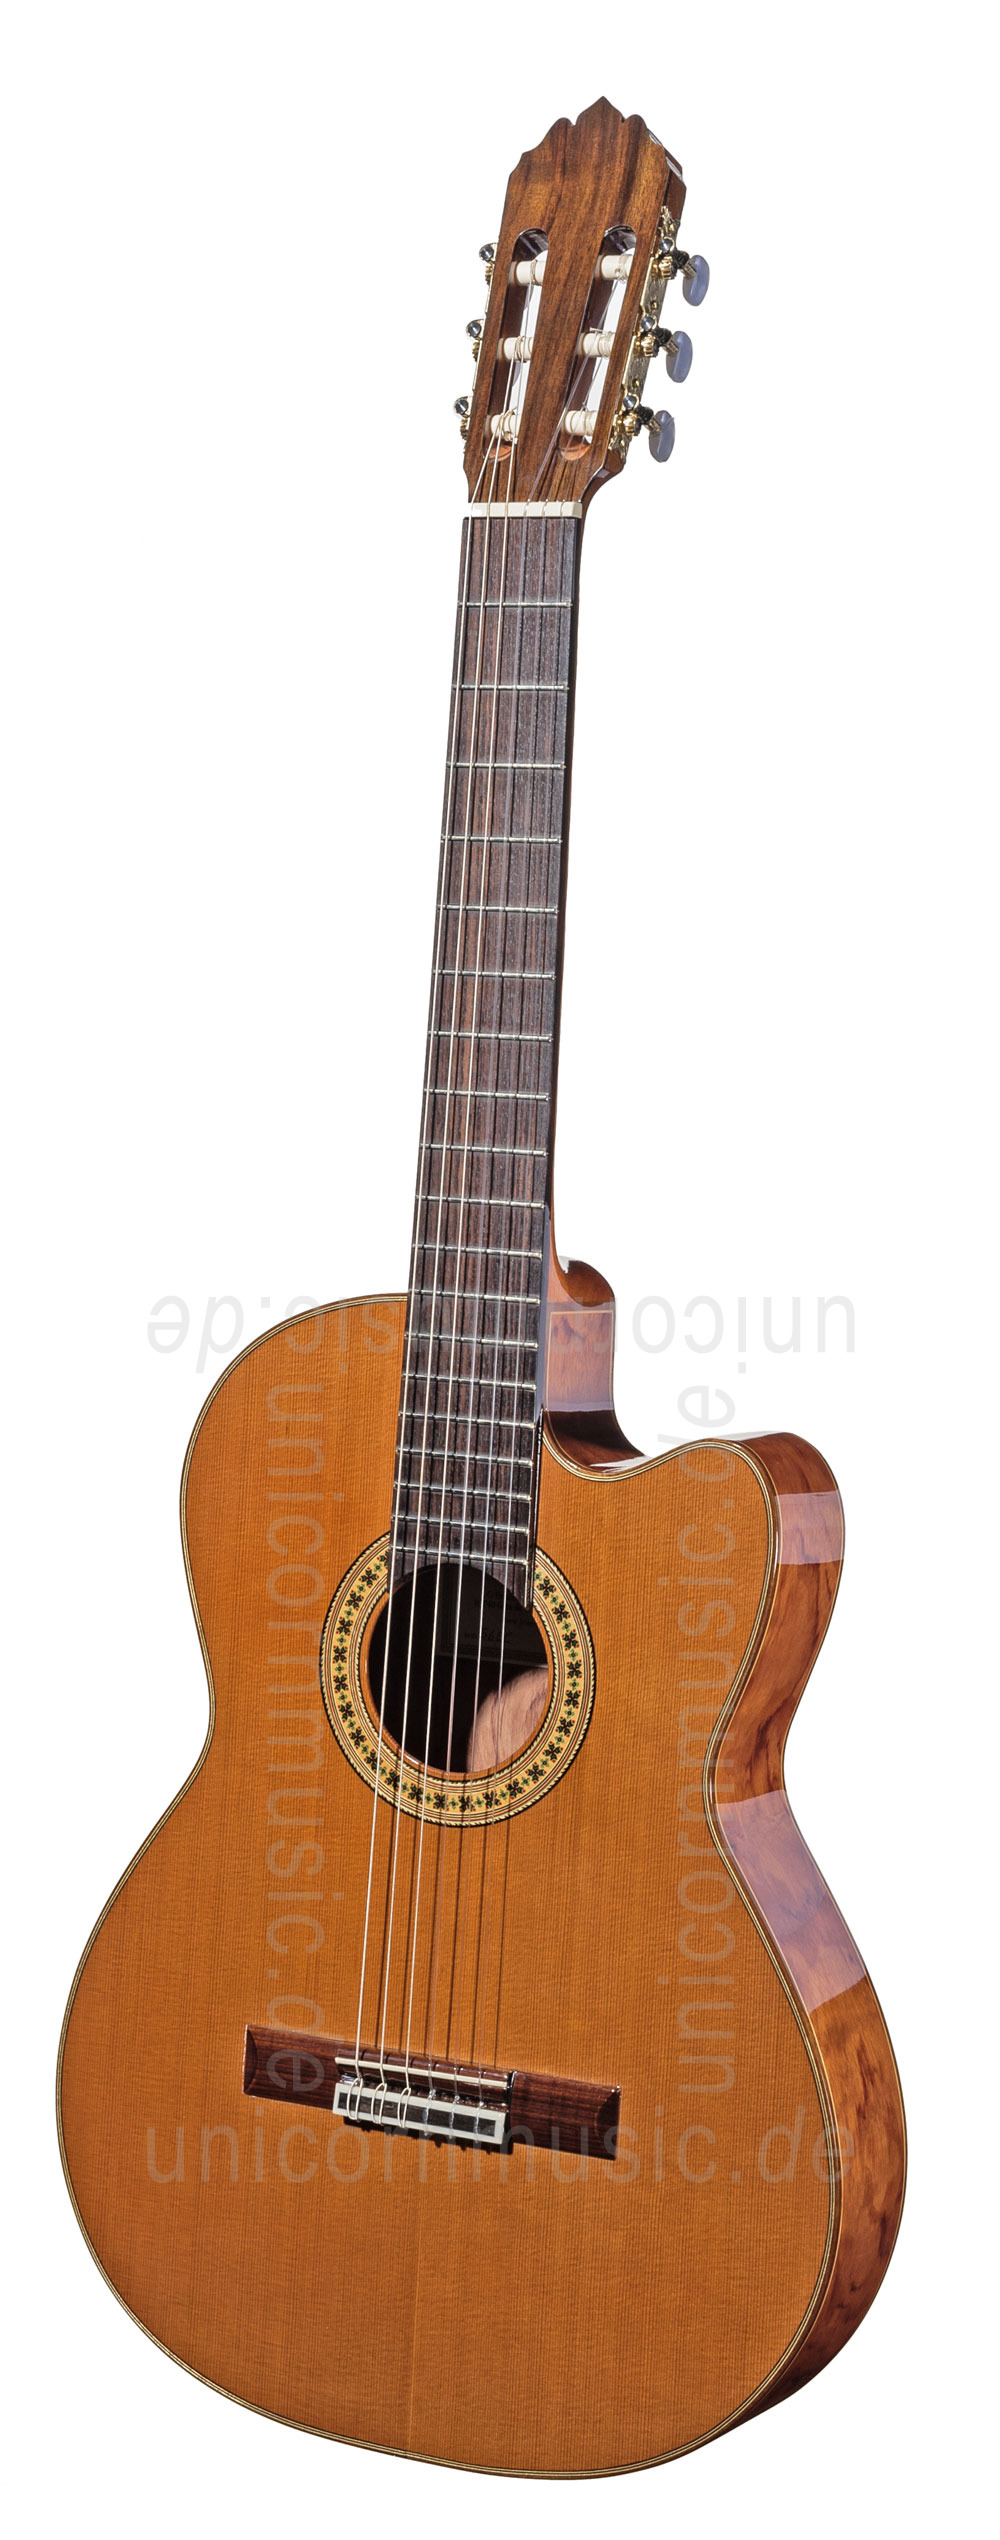 to article description / price Spanish Classical Guitar JOAN CASHIMIRA MODEL 56e E-C Cutaway Thinline - without pickup - solid cedar top